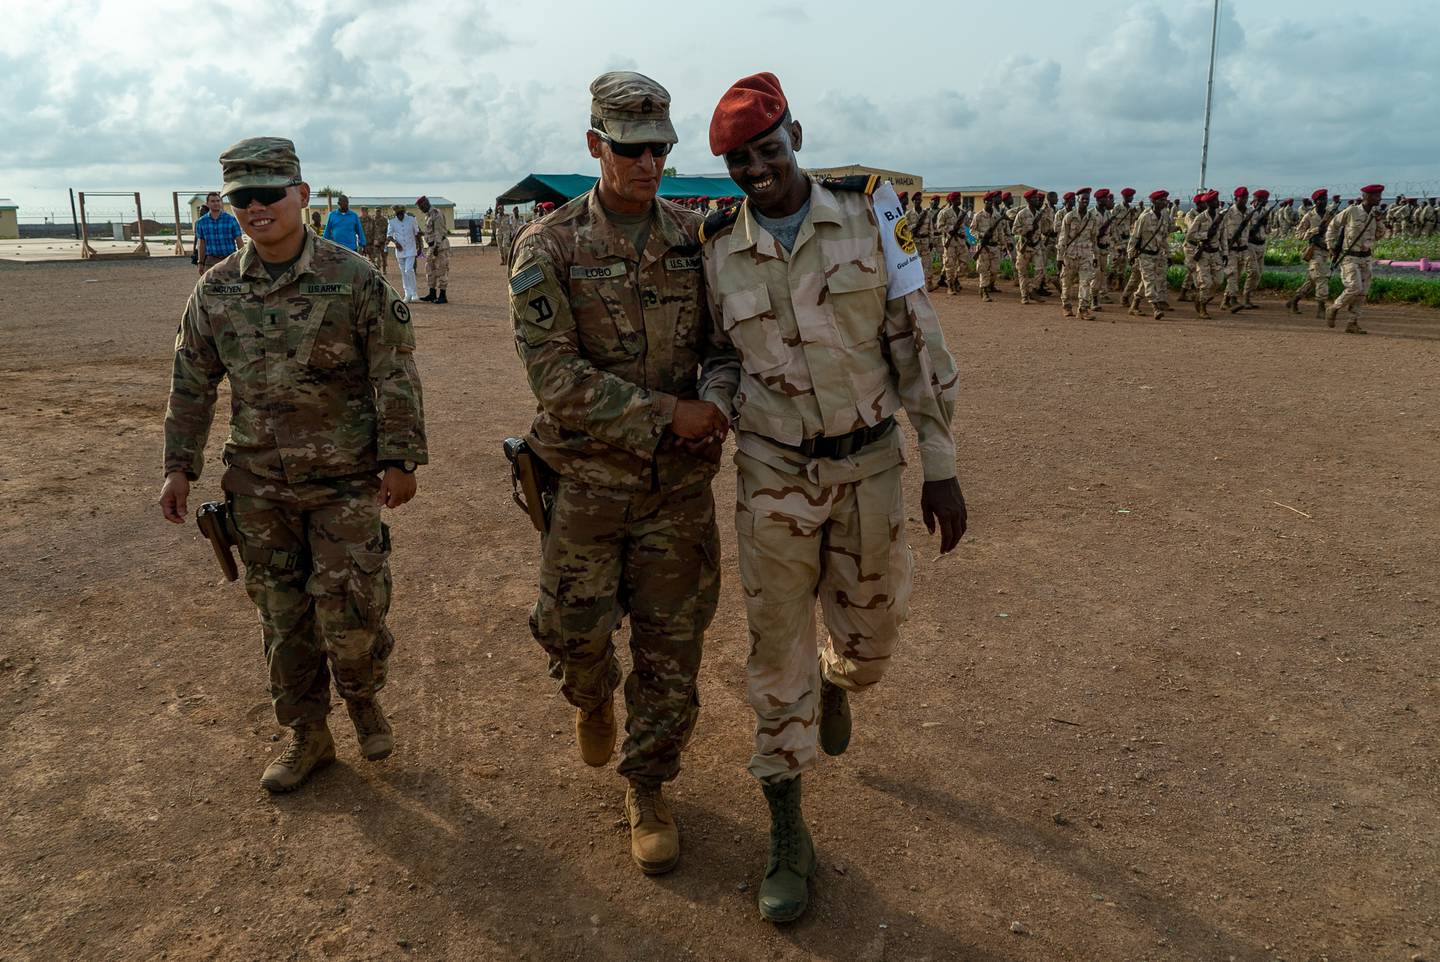 Army Sgt. 1st Class Hercules Lobo (right) and 1st Lt. Dui Nguyen congratulate a soldier assigned to Djibouti’s Rapid Intervention Battalion during a ceremony in Ali Oune, Djibouti, June 6, 2019.